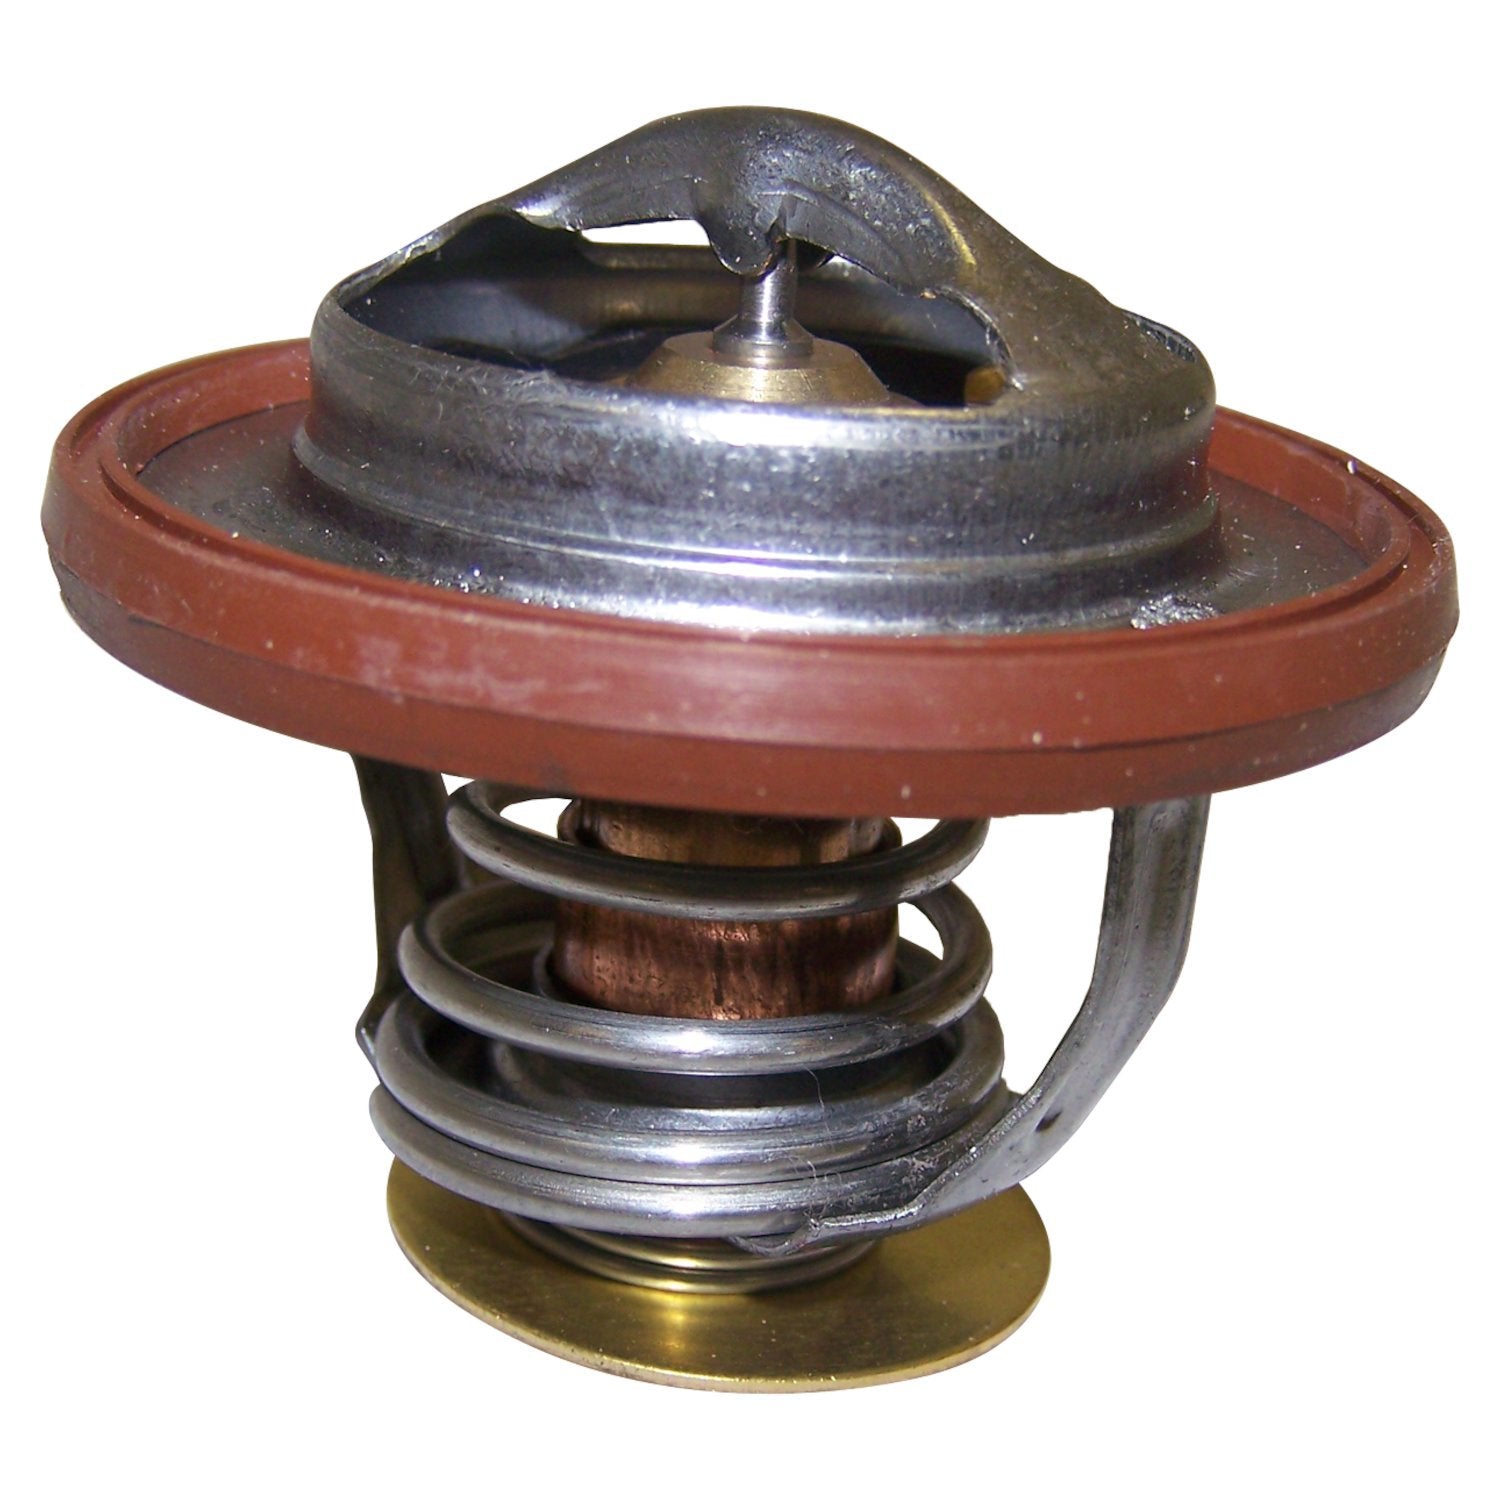 203 Degree Thermostat, Includes Seal